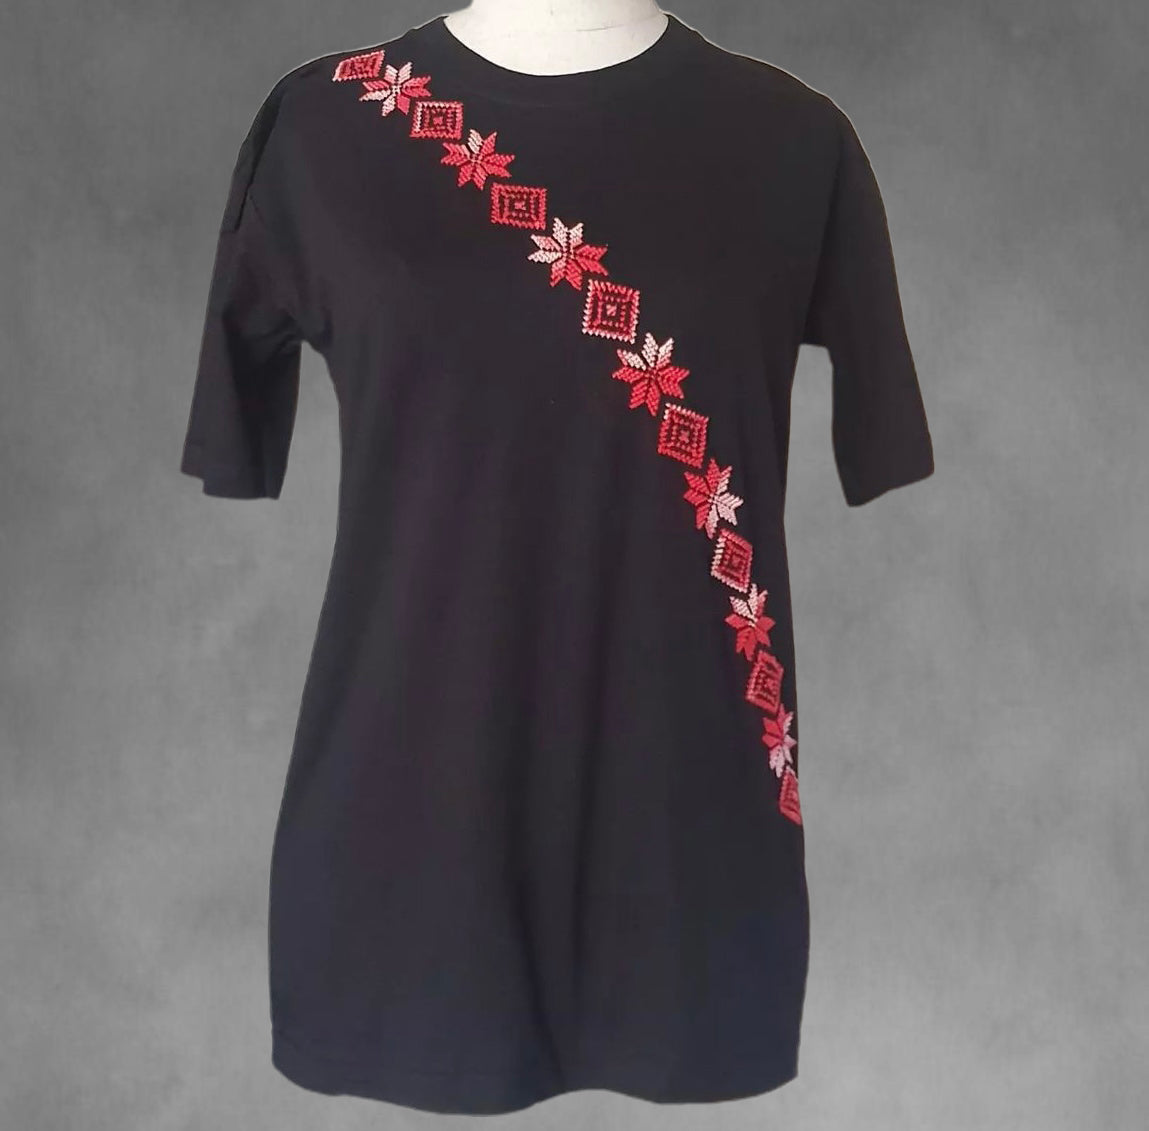 Black/Red Embroidered T-shirt